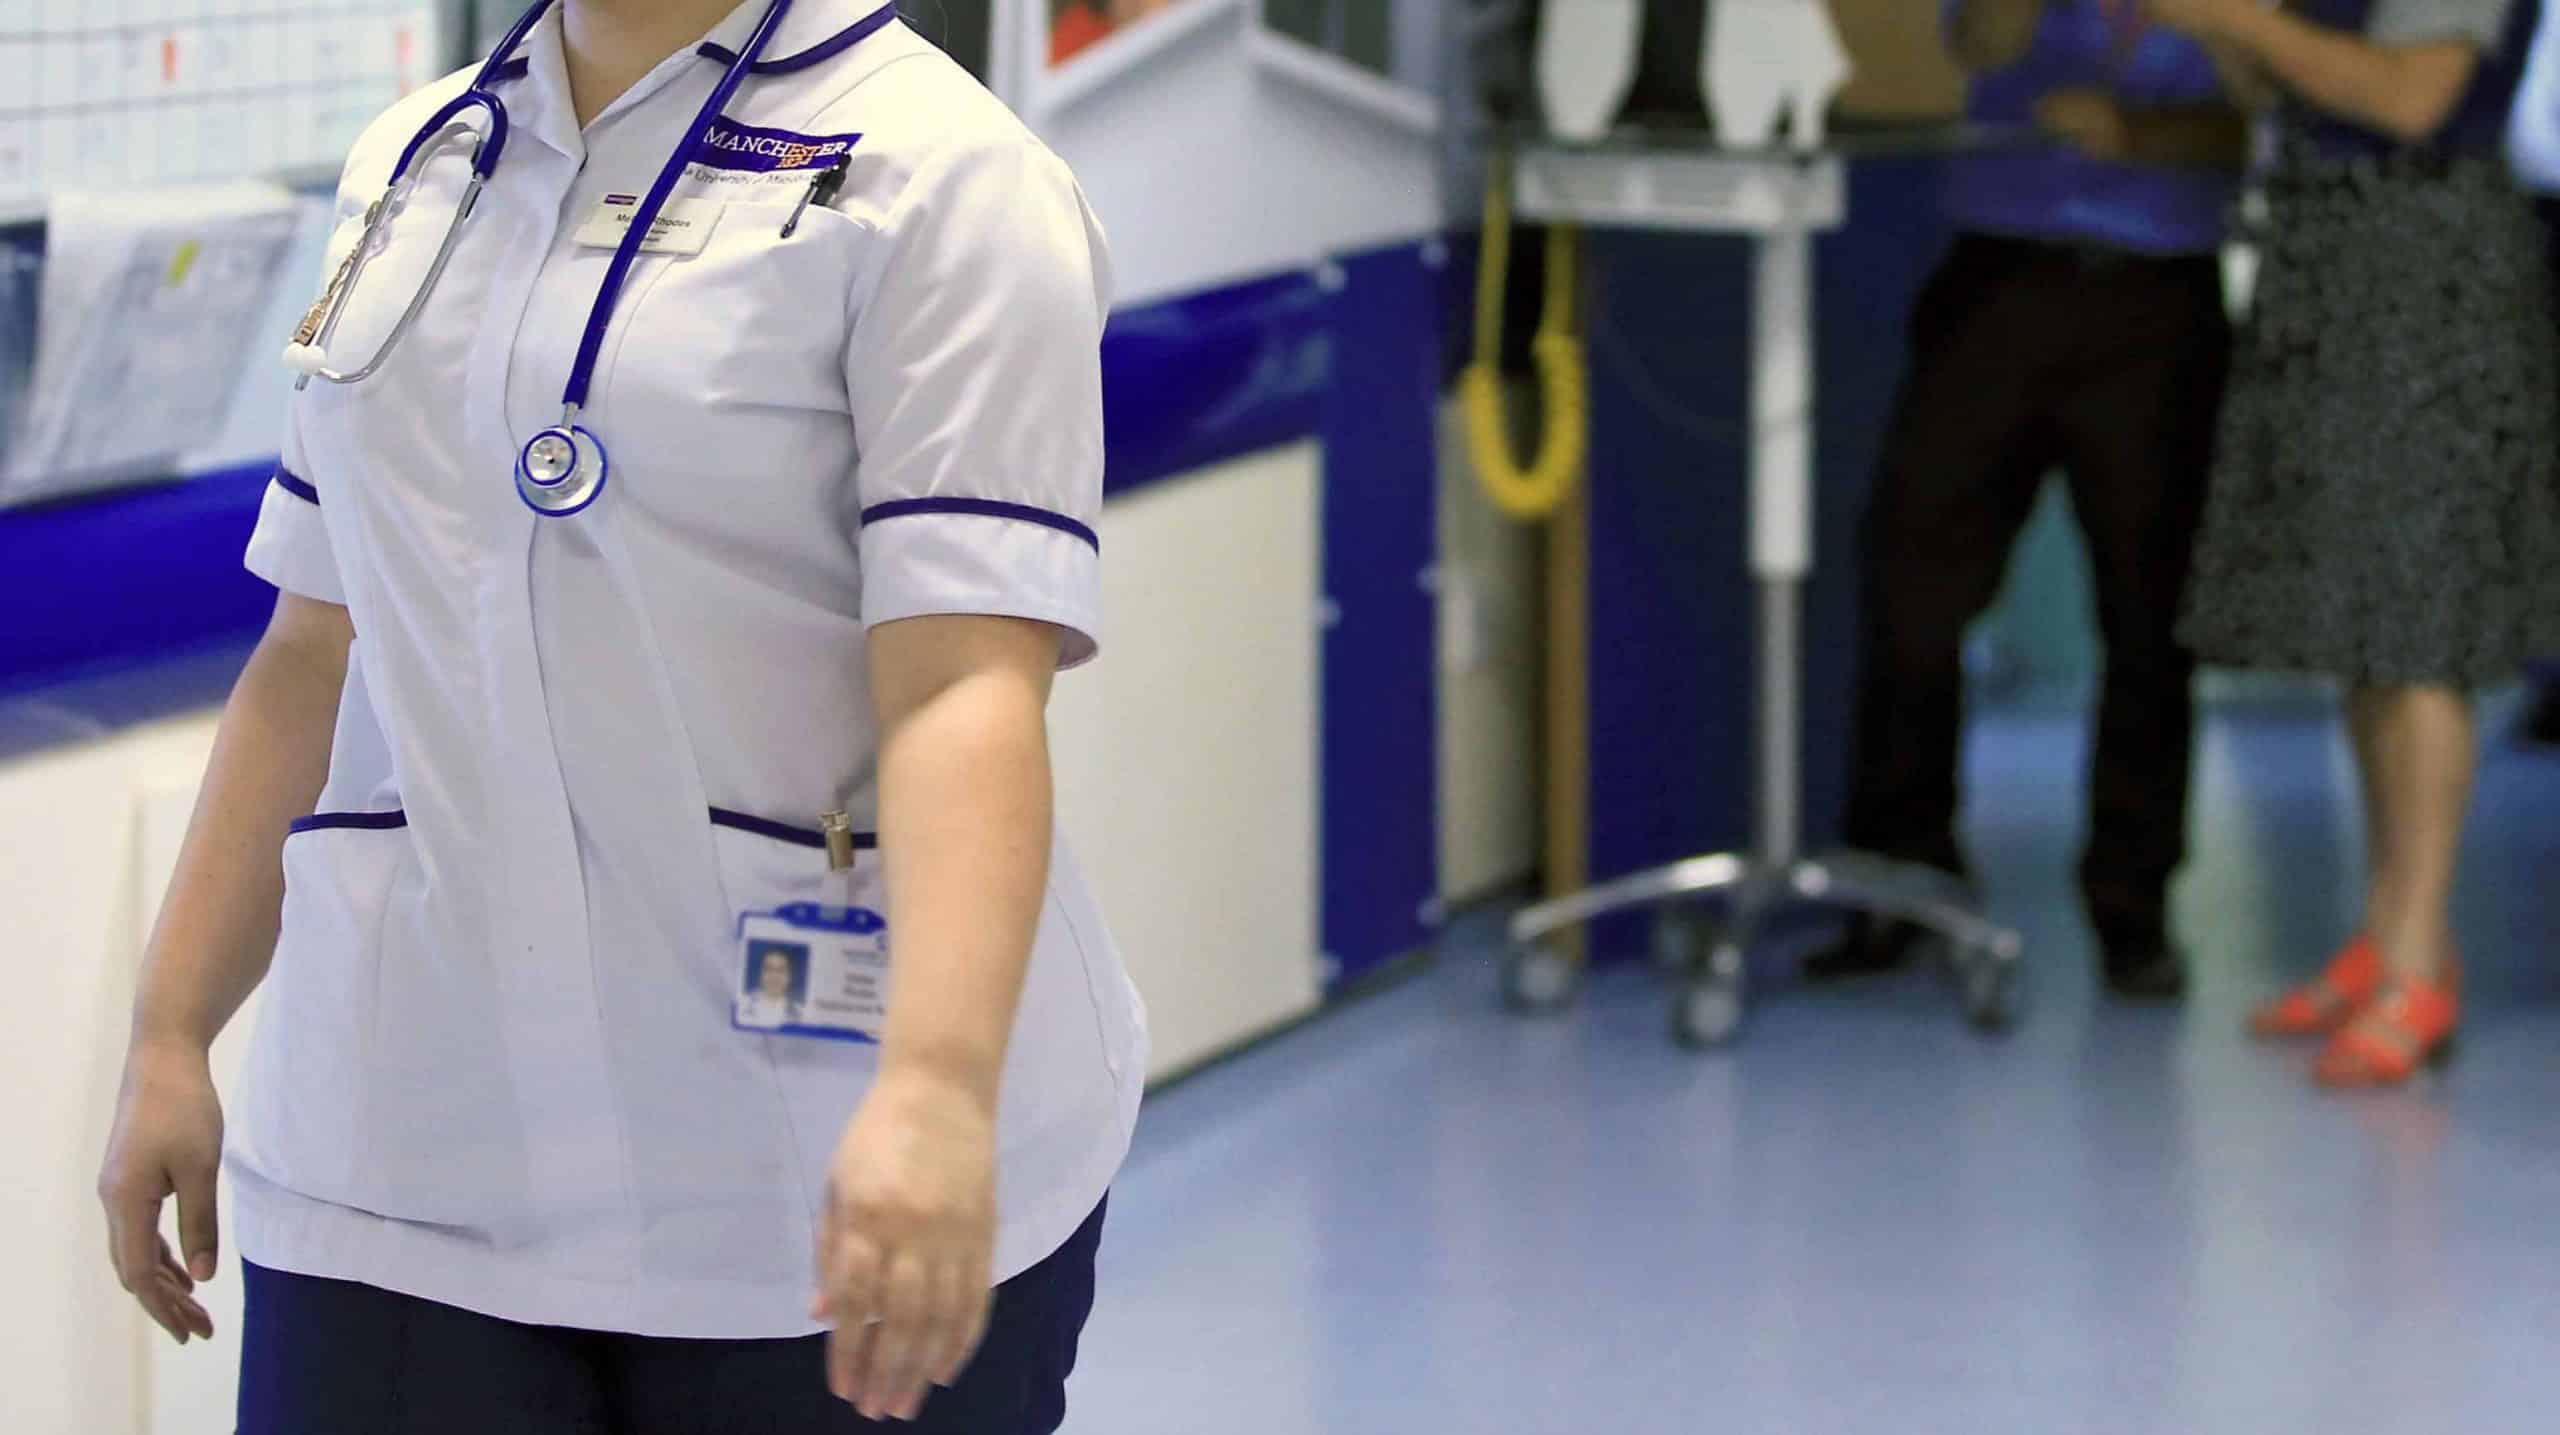 Thousands of NHS staff from EU have left health service since referendum – FOI request reveals